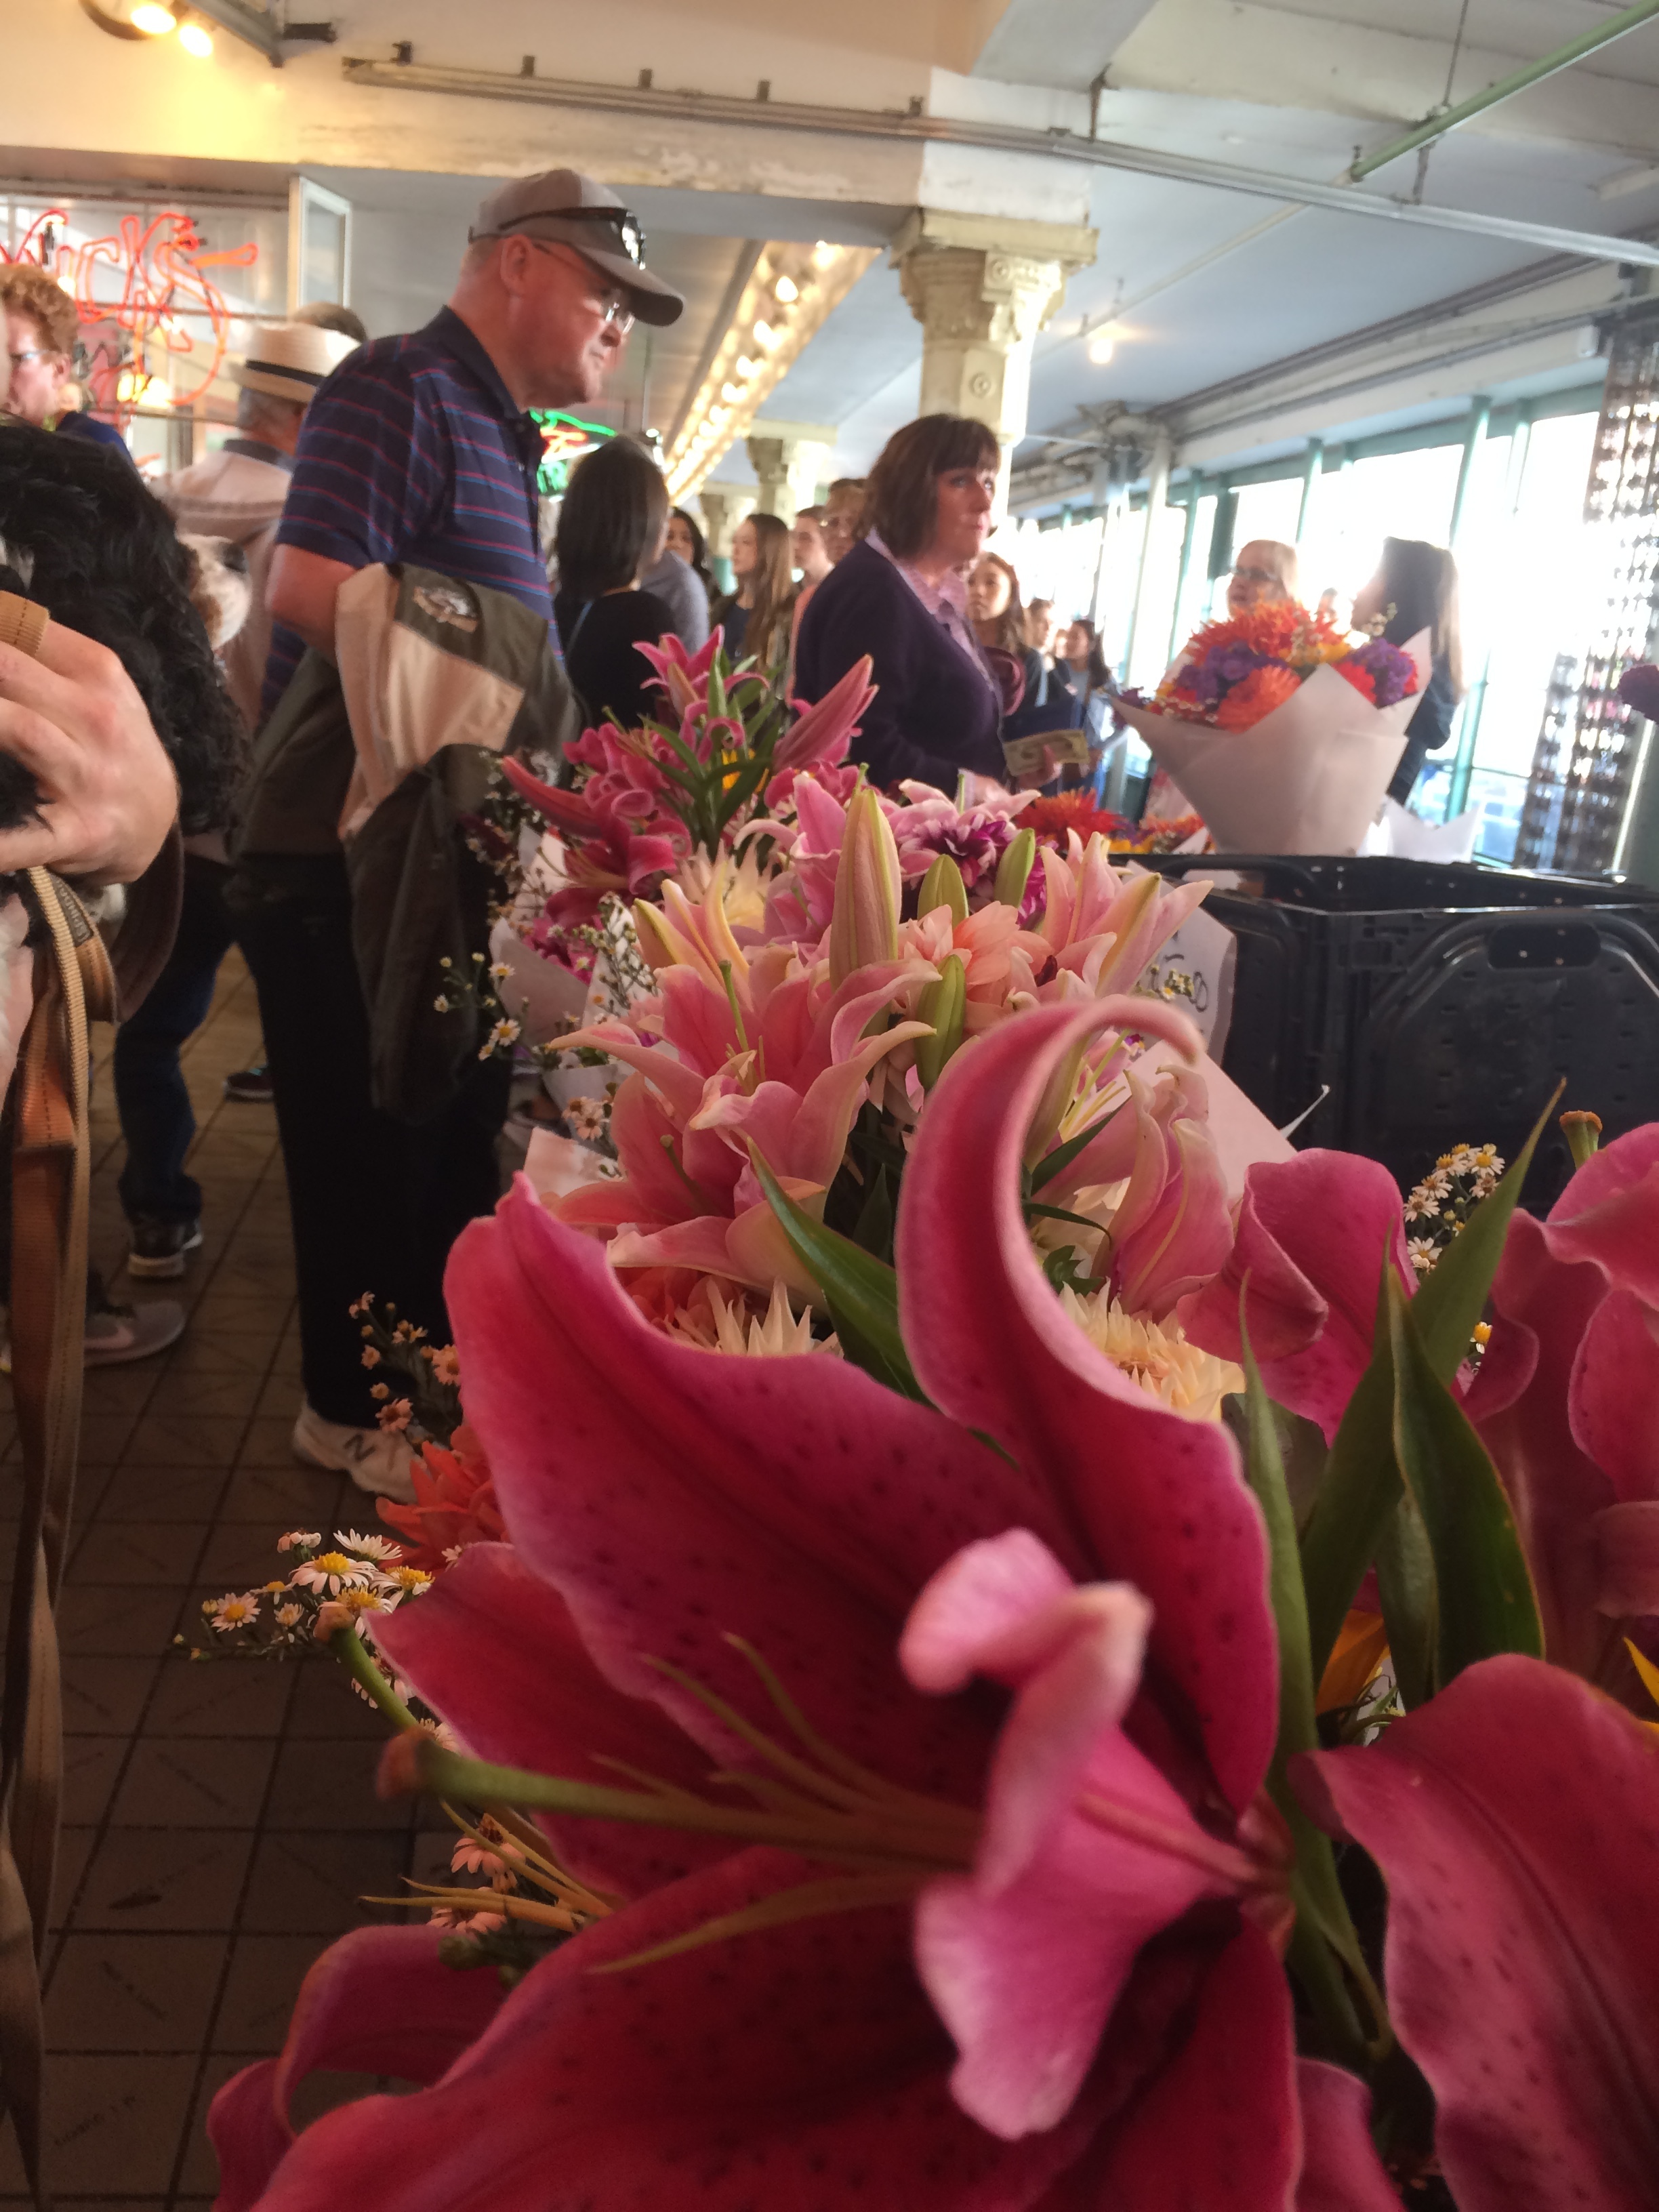  Pike Place in Seattle. I enjoyed the rows and rows of flowers more than the fish.&nbsp; 